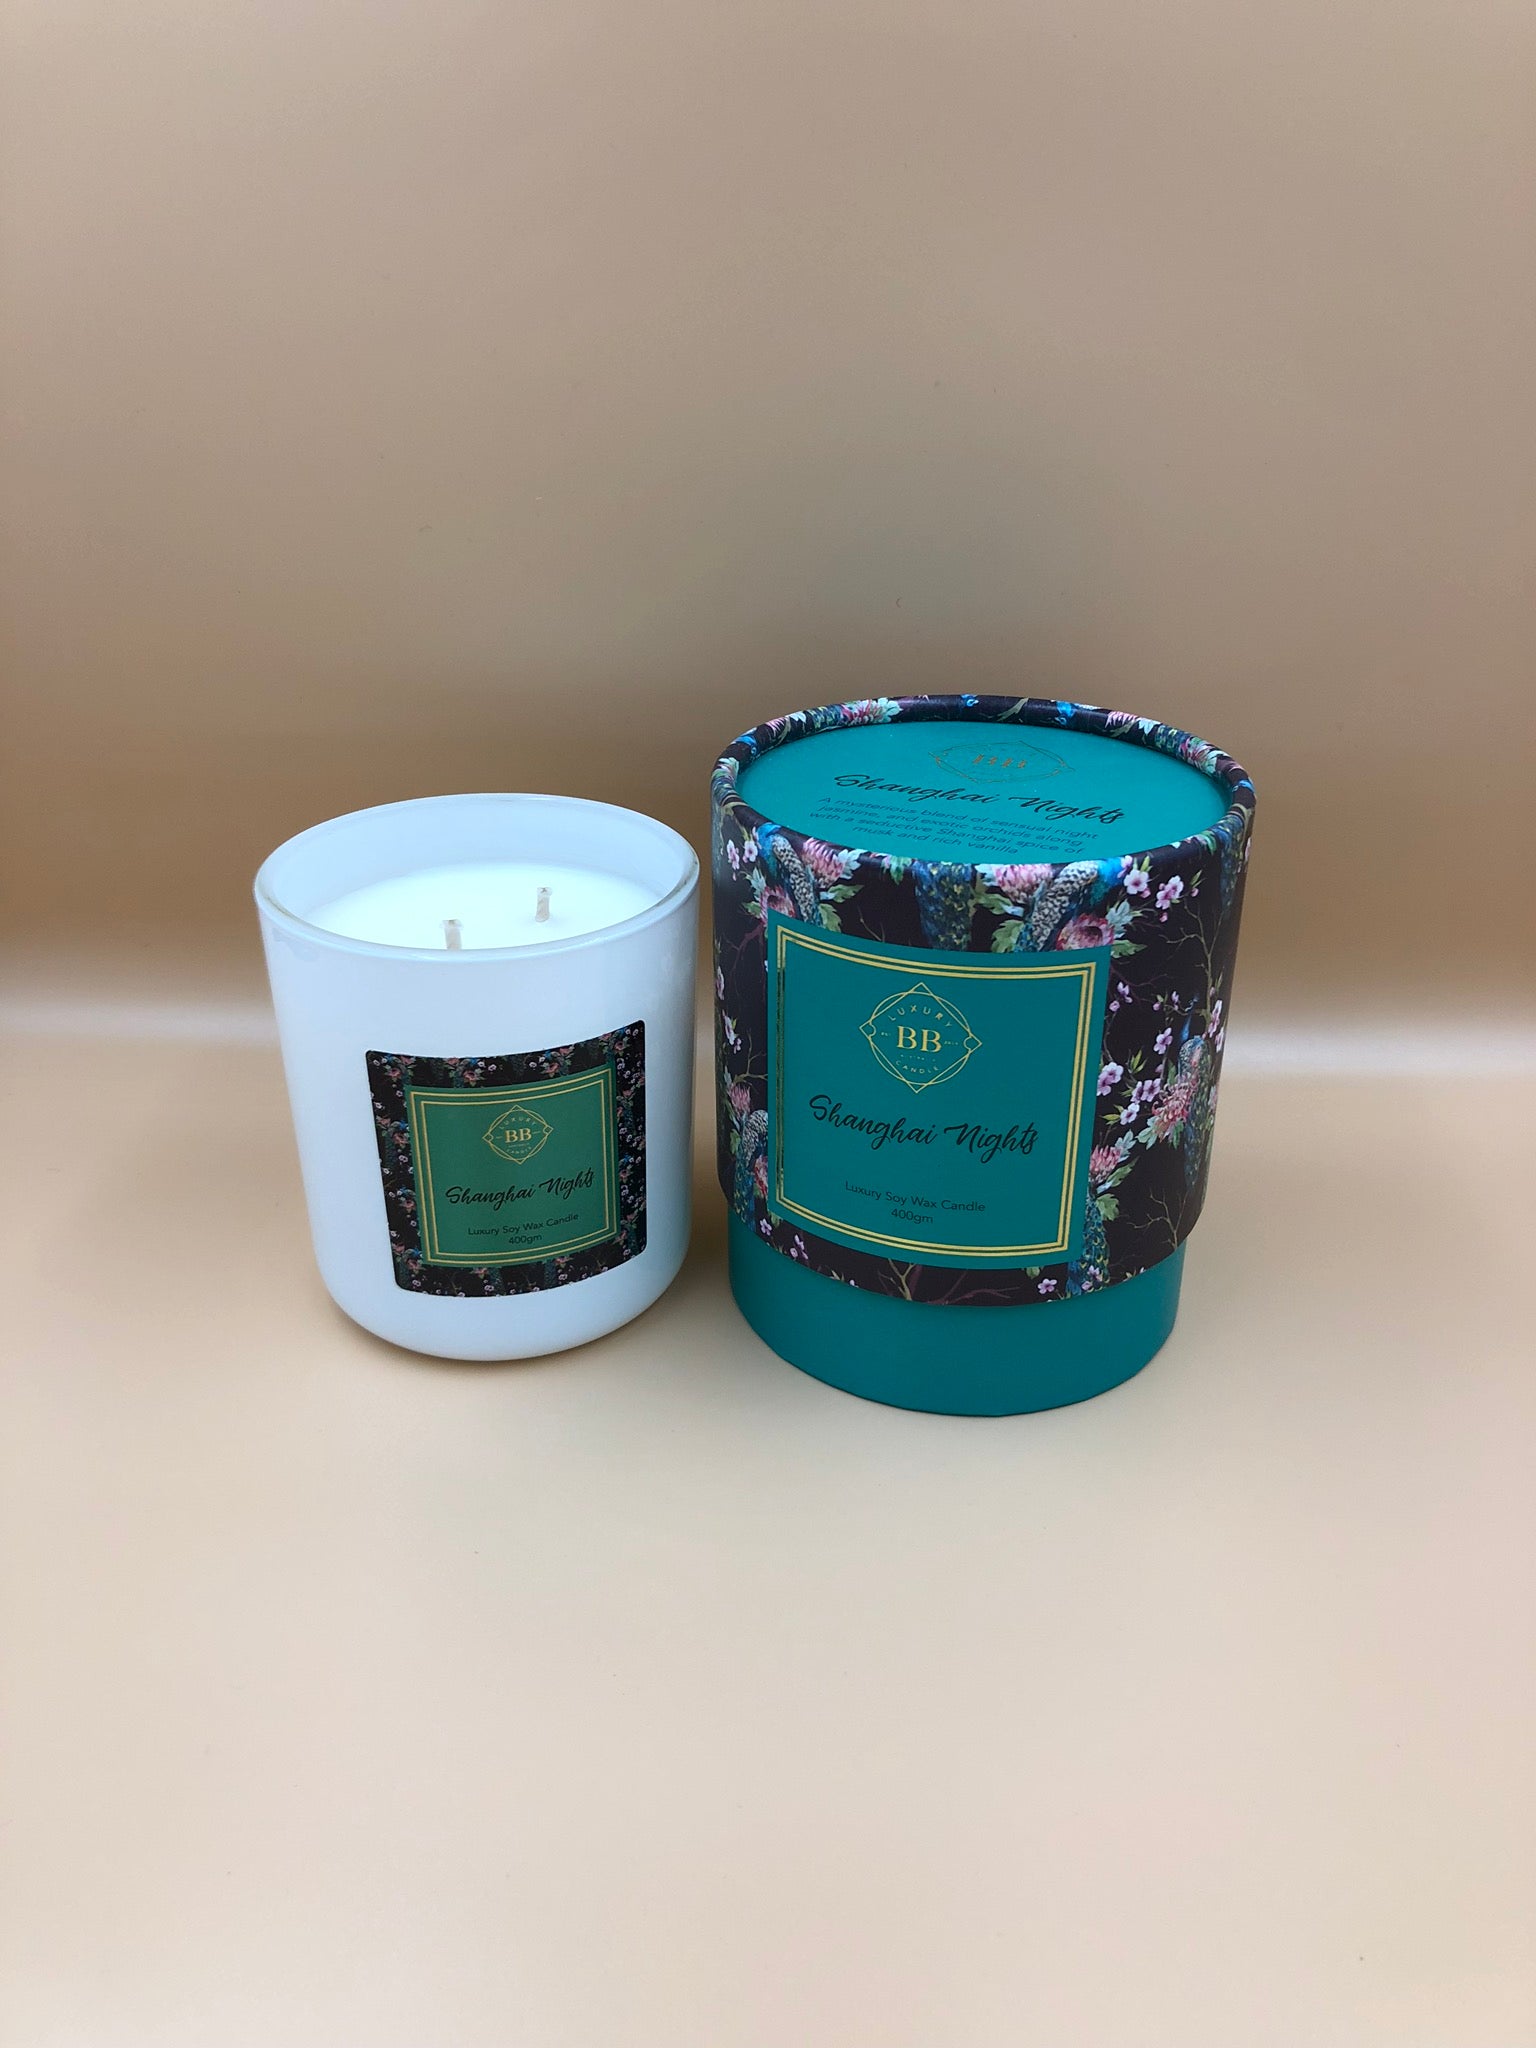 Shanghai Nights 400g Soy Candle | Success Gifts | Online Store & Mountain Gate VIC